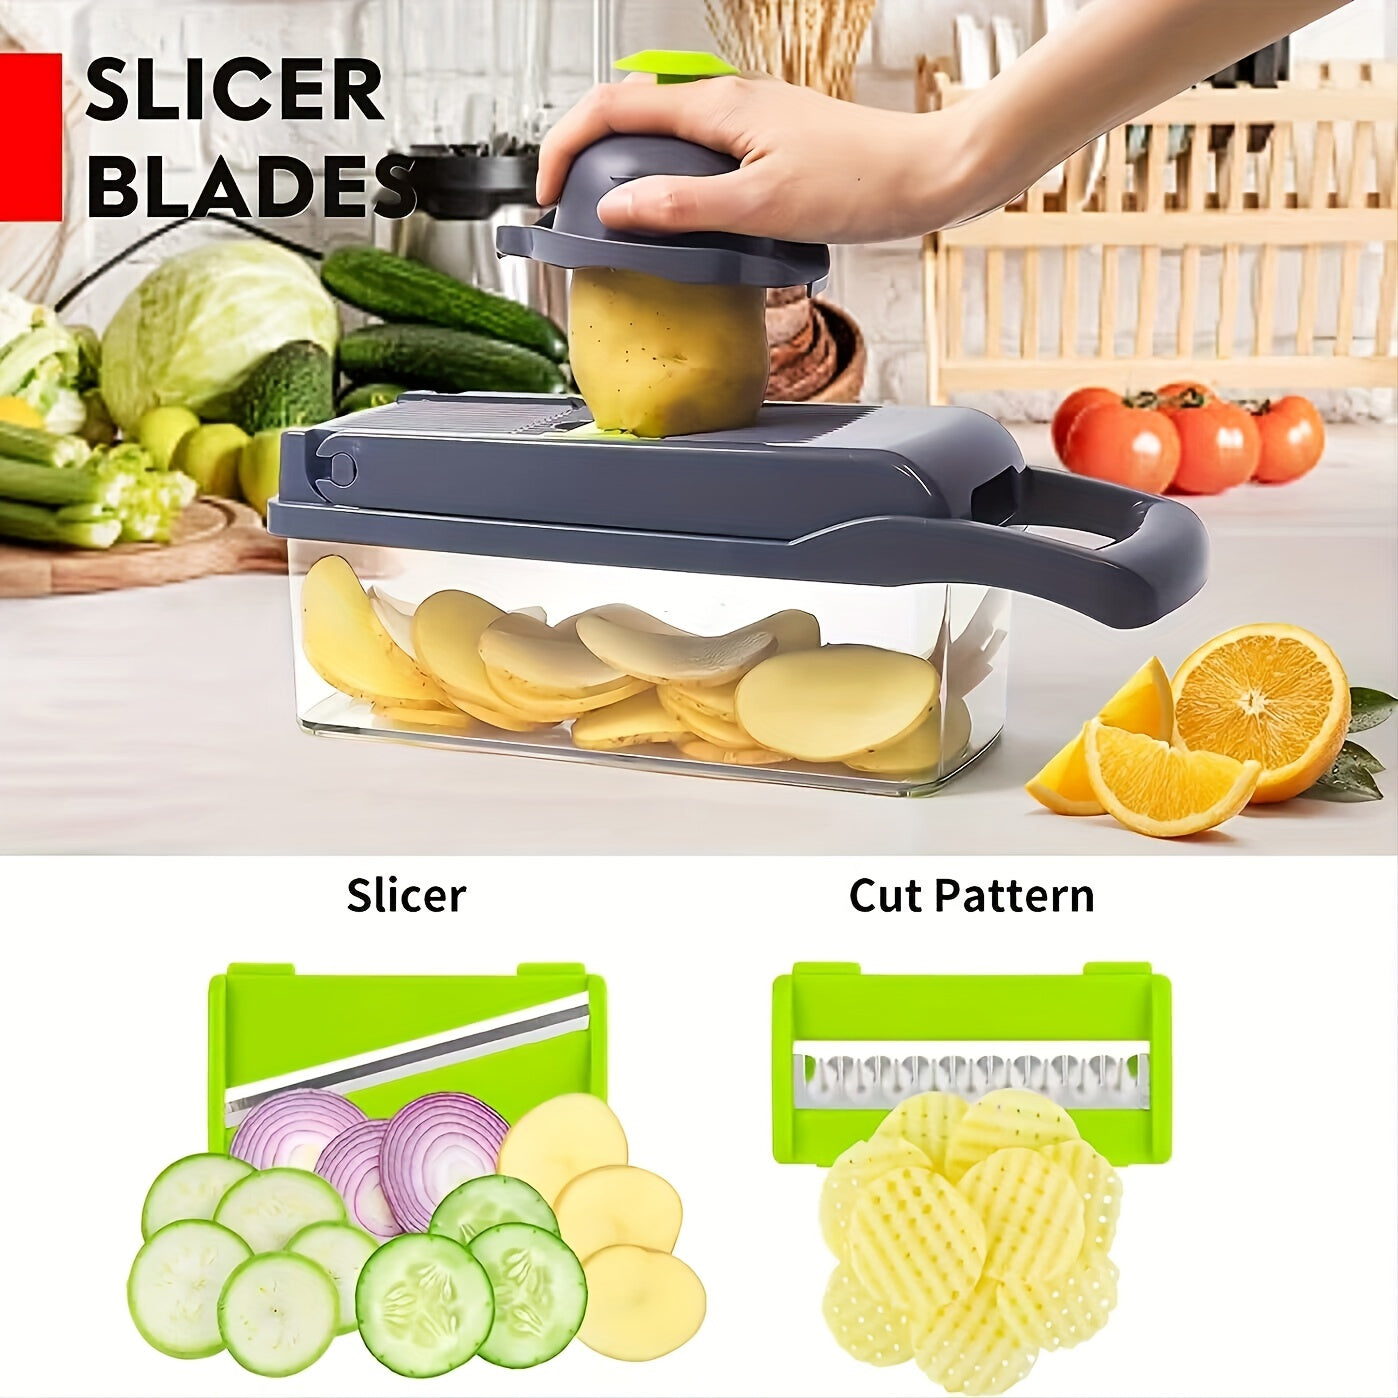 Kitchen Vegetable Chopper 1pc, 13-in-1 Food Cutter With 8 Stainless Steel Blades And Container - Ideal For Slicing Onions, Garlic, And More - 13.7x4.7 Inches